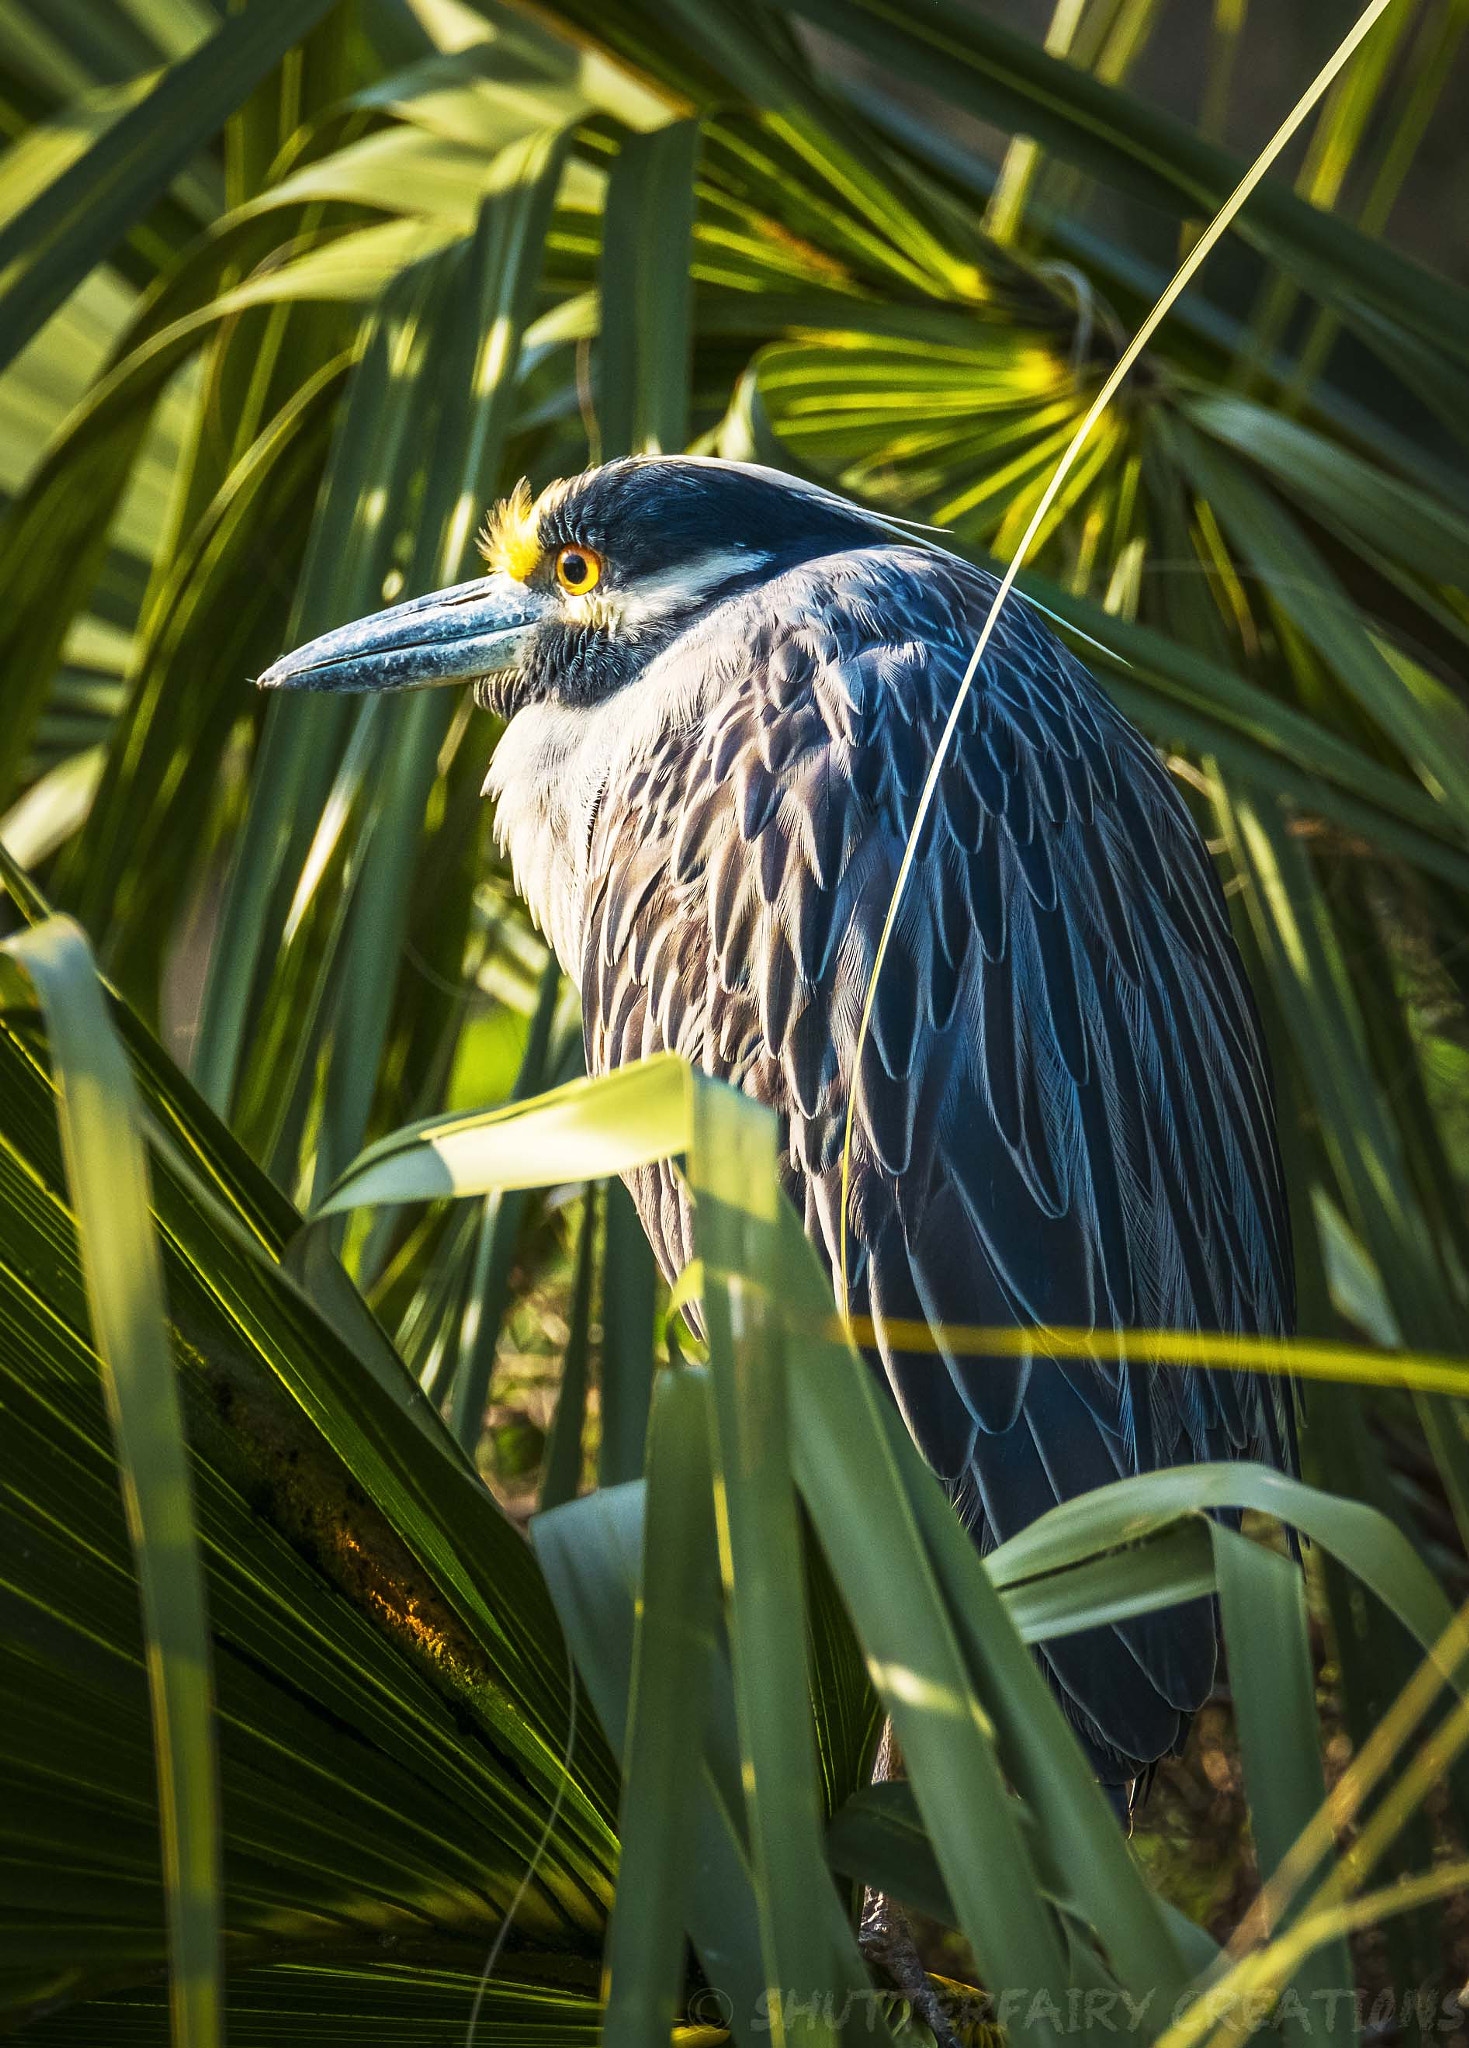 XF100-400mmF4.5-5.6 R LM OIS WR + 1.4x sample photo. Yellow capped night heron in st. augustine photography